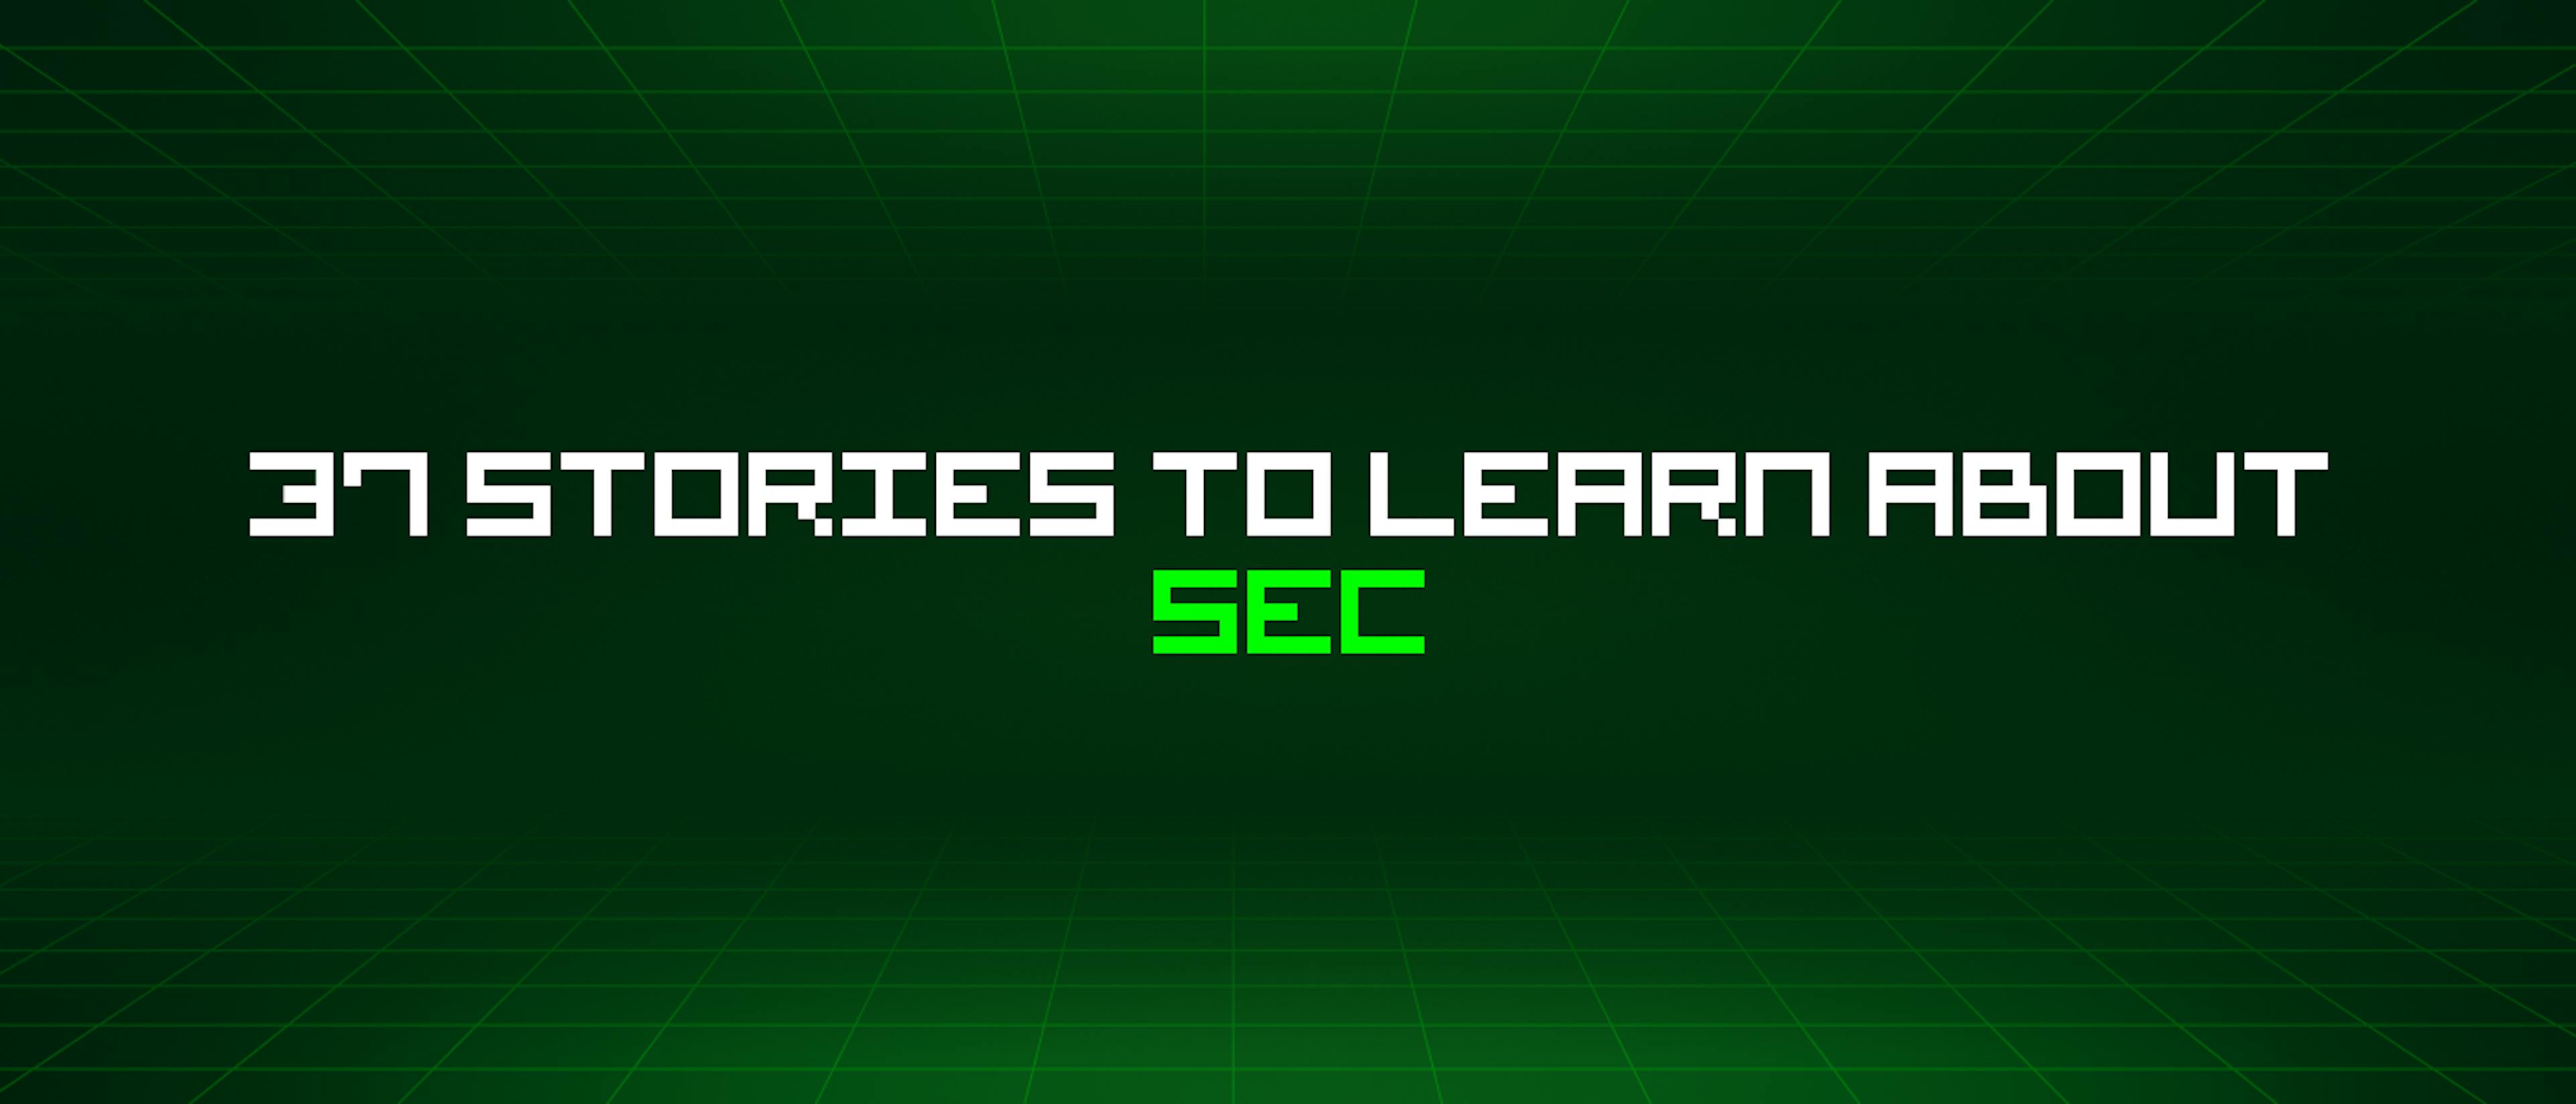 featured image - 37 Stories To Learn About Sec